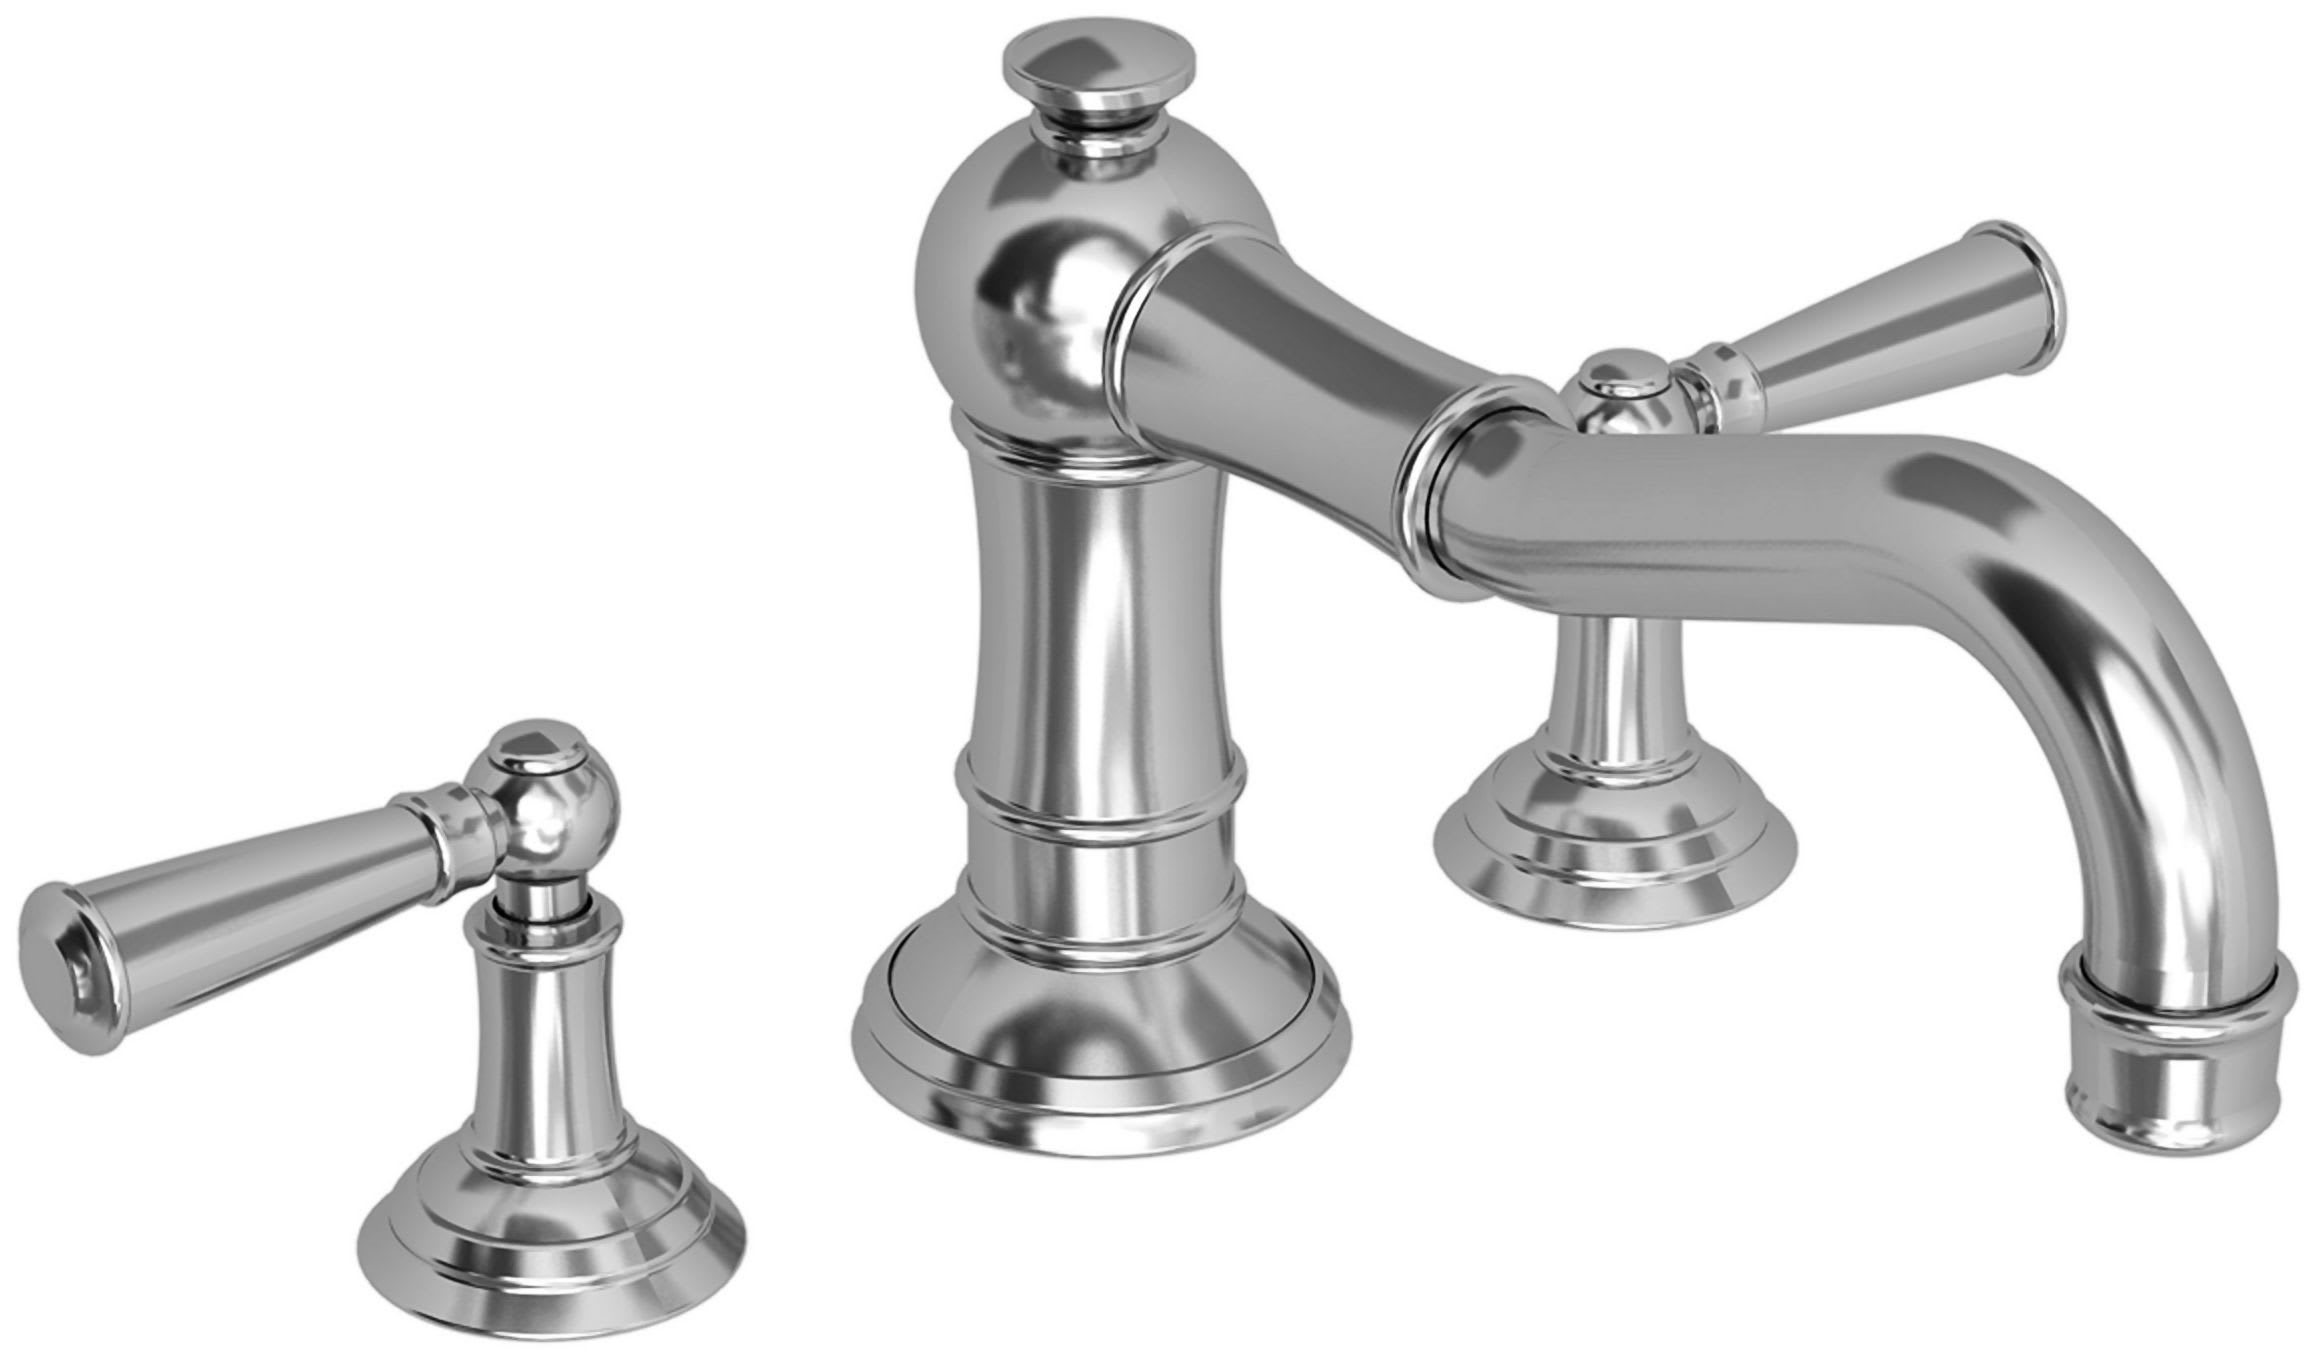 Newport Brass 3-2476/26 Polished Chrome Double Handle Deck Mounted Roman  Tub Filler with Tub Spout and Metal Lever Handles from the Jacobean  Collection